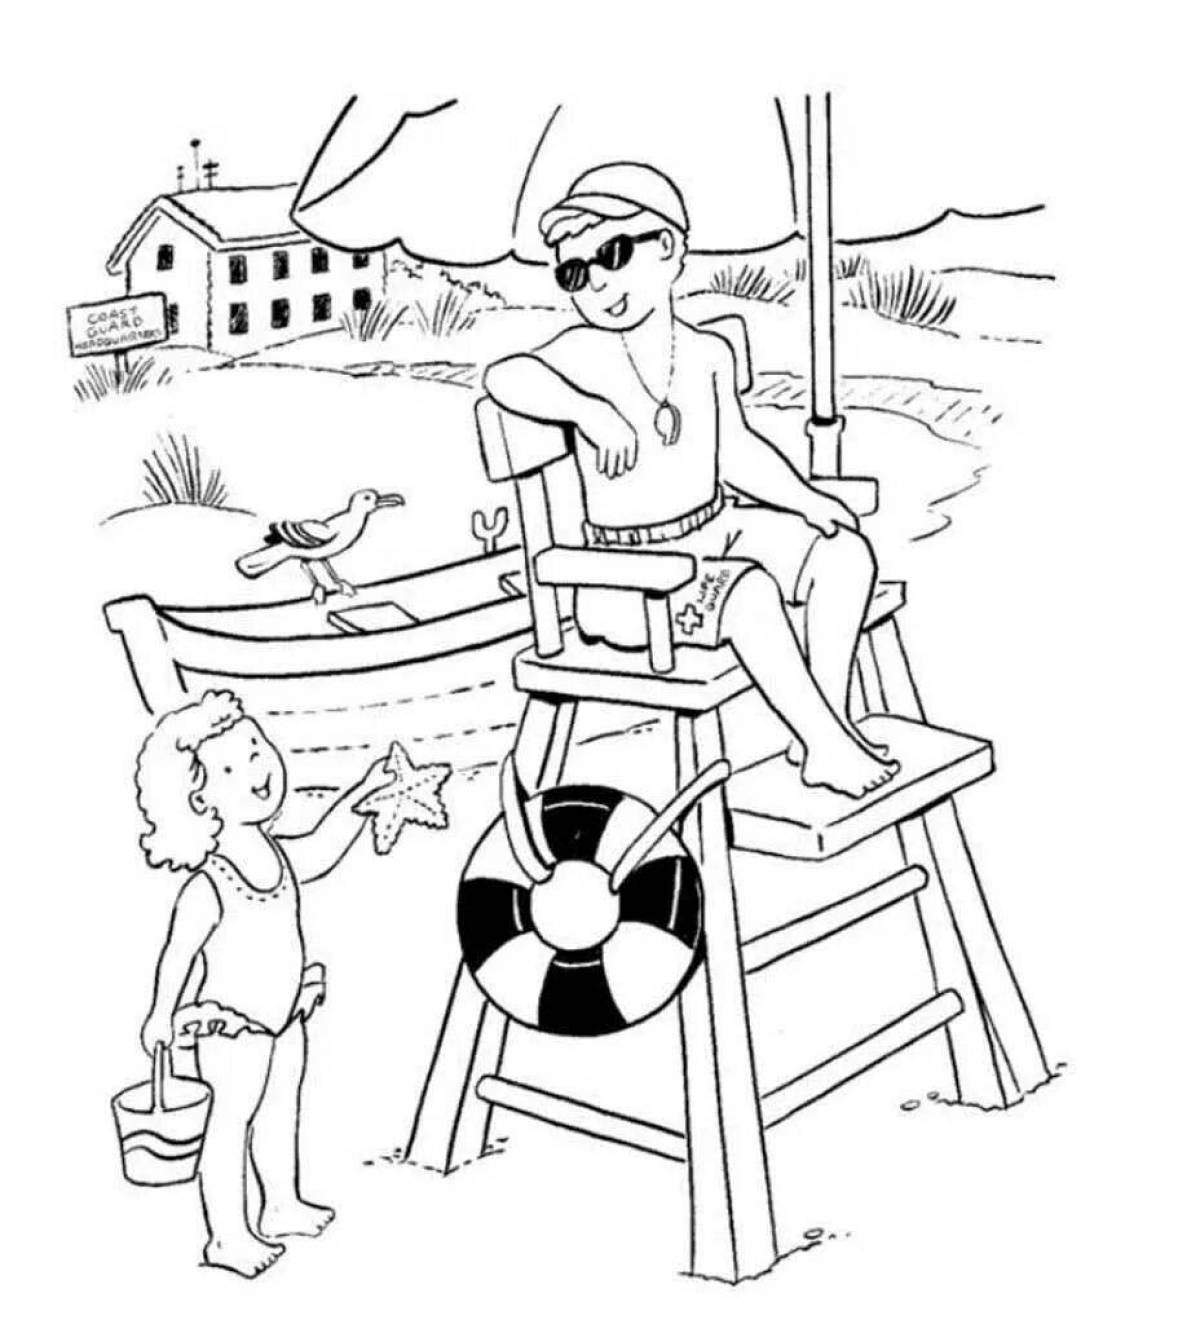 Water safety colorful coloring page